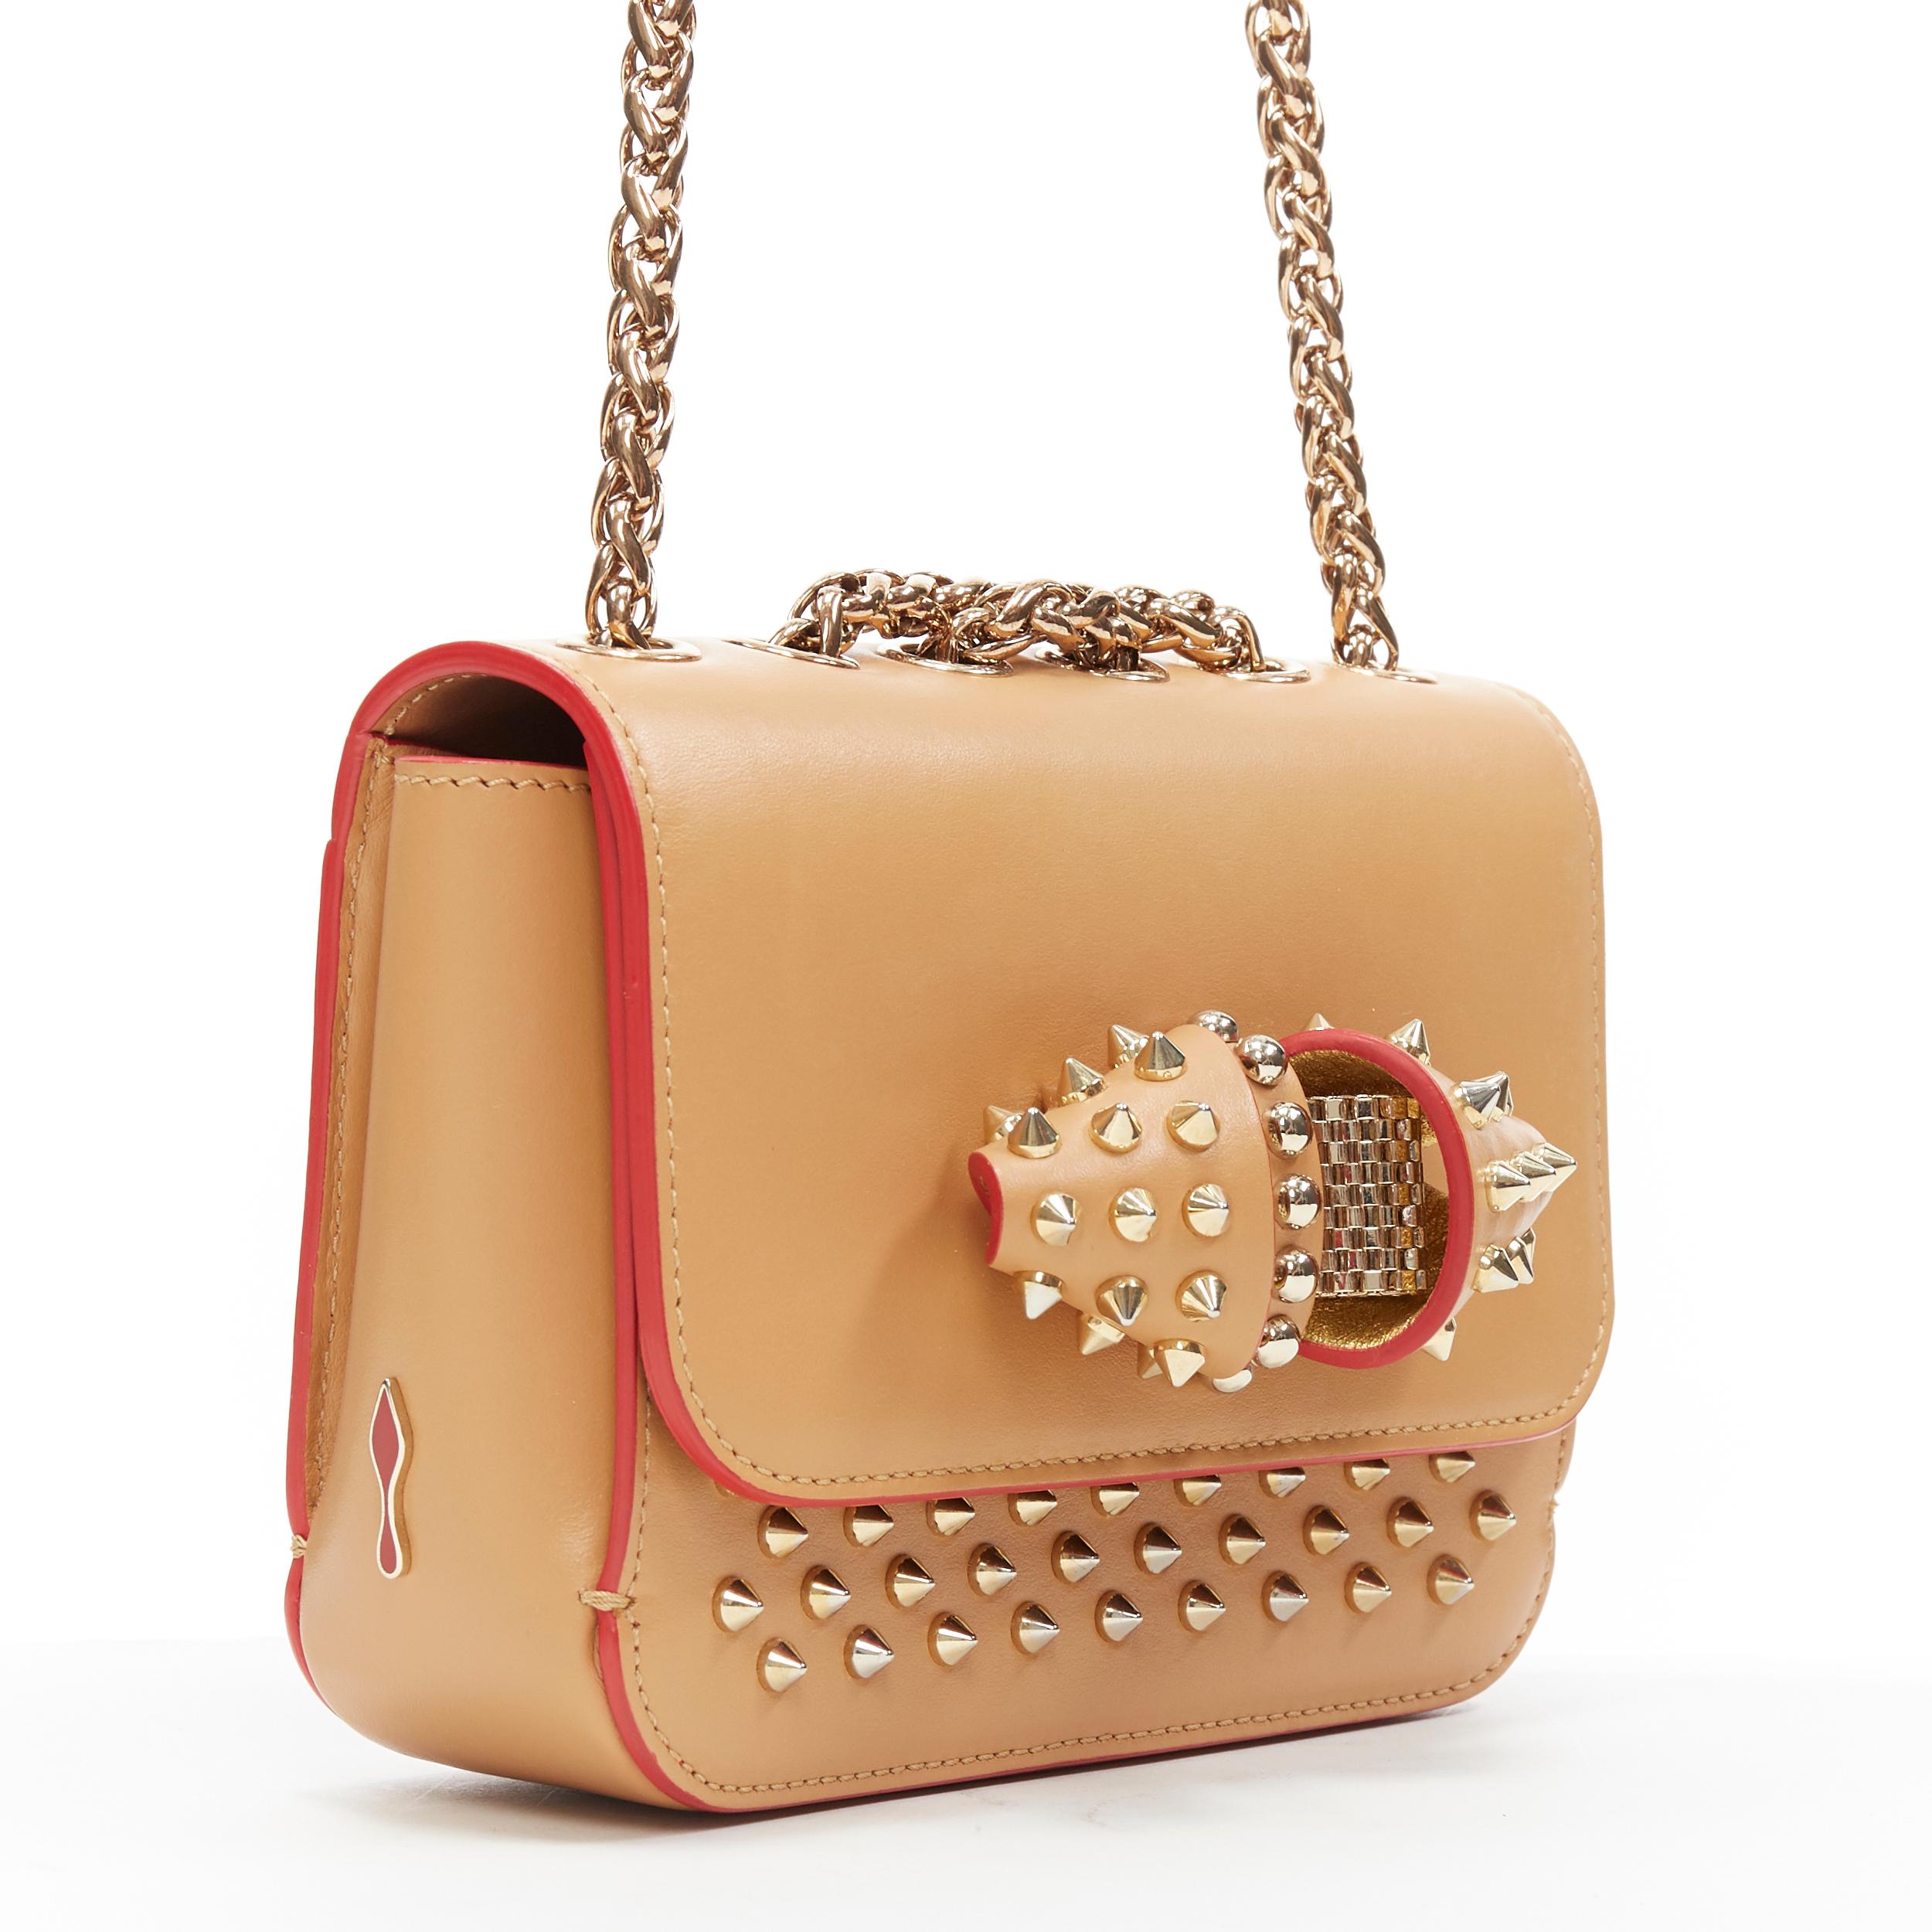 CHRISTIAN LOUBOUTIN Sweet Charity Medium tan brown stud bow chain shoulder bag
Brand: Christian Louboutin
Designer: Christian Louboutin
Model Name / Style: Sweet Charity
Material: Leather
Color: Brown
Pattern: Solid
Lining material: Leather
Extra